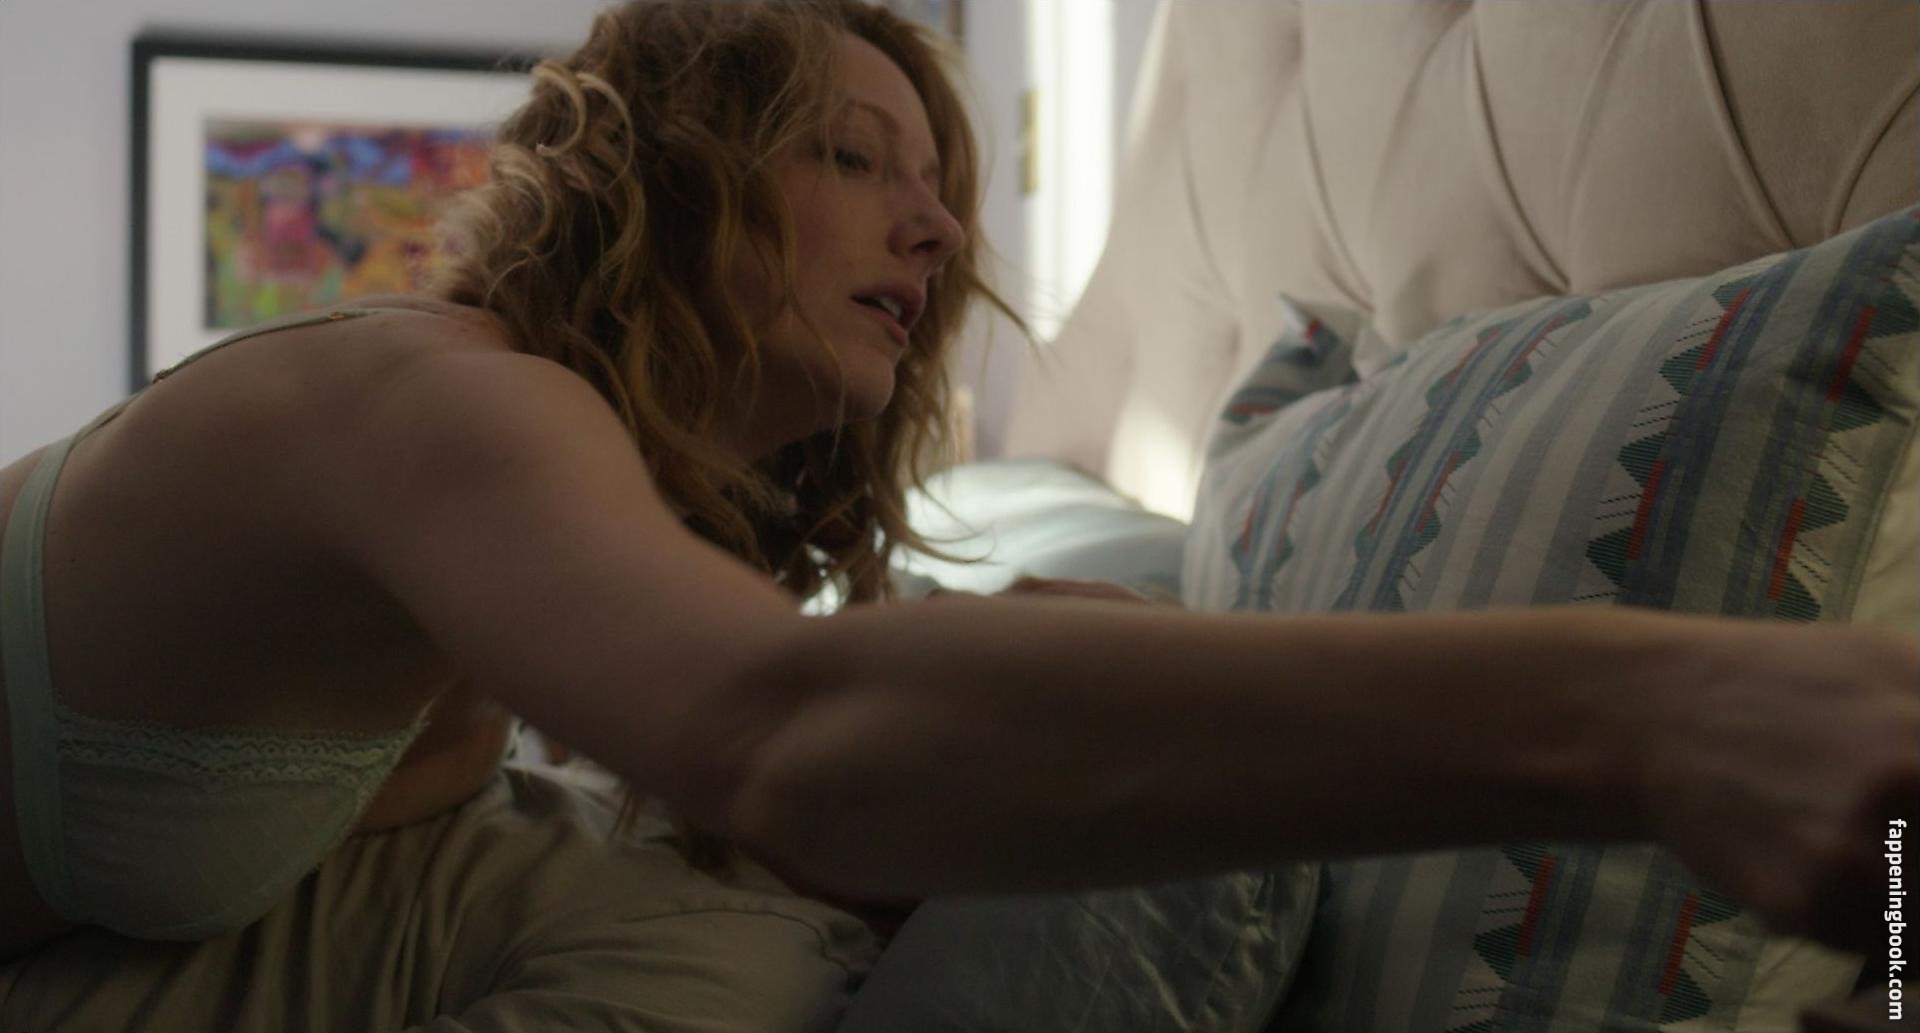 Judy Greer Nude, The Fappening - Photo #270844 - FappeningBook.